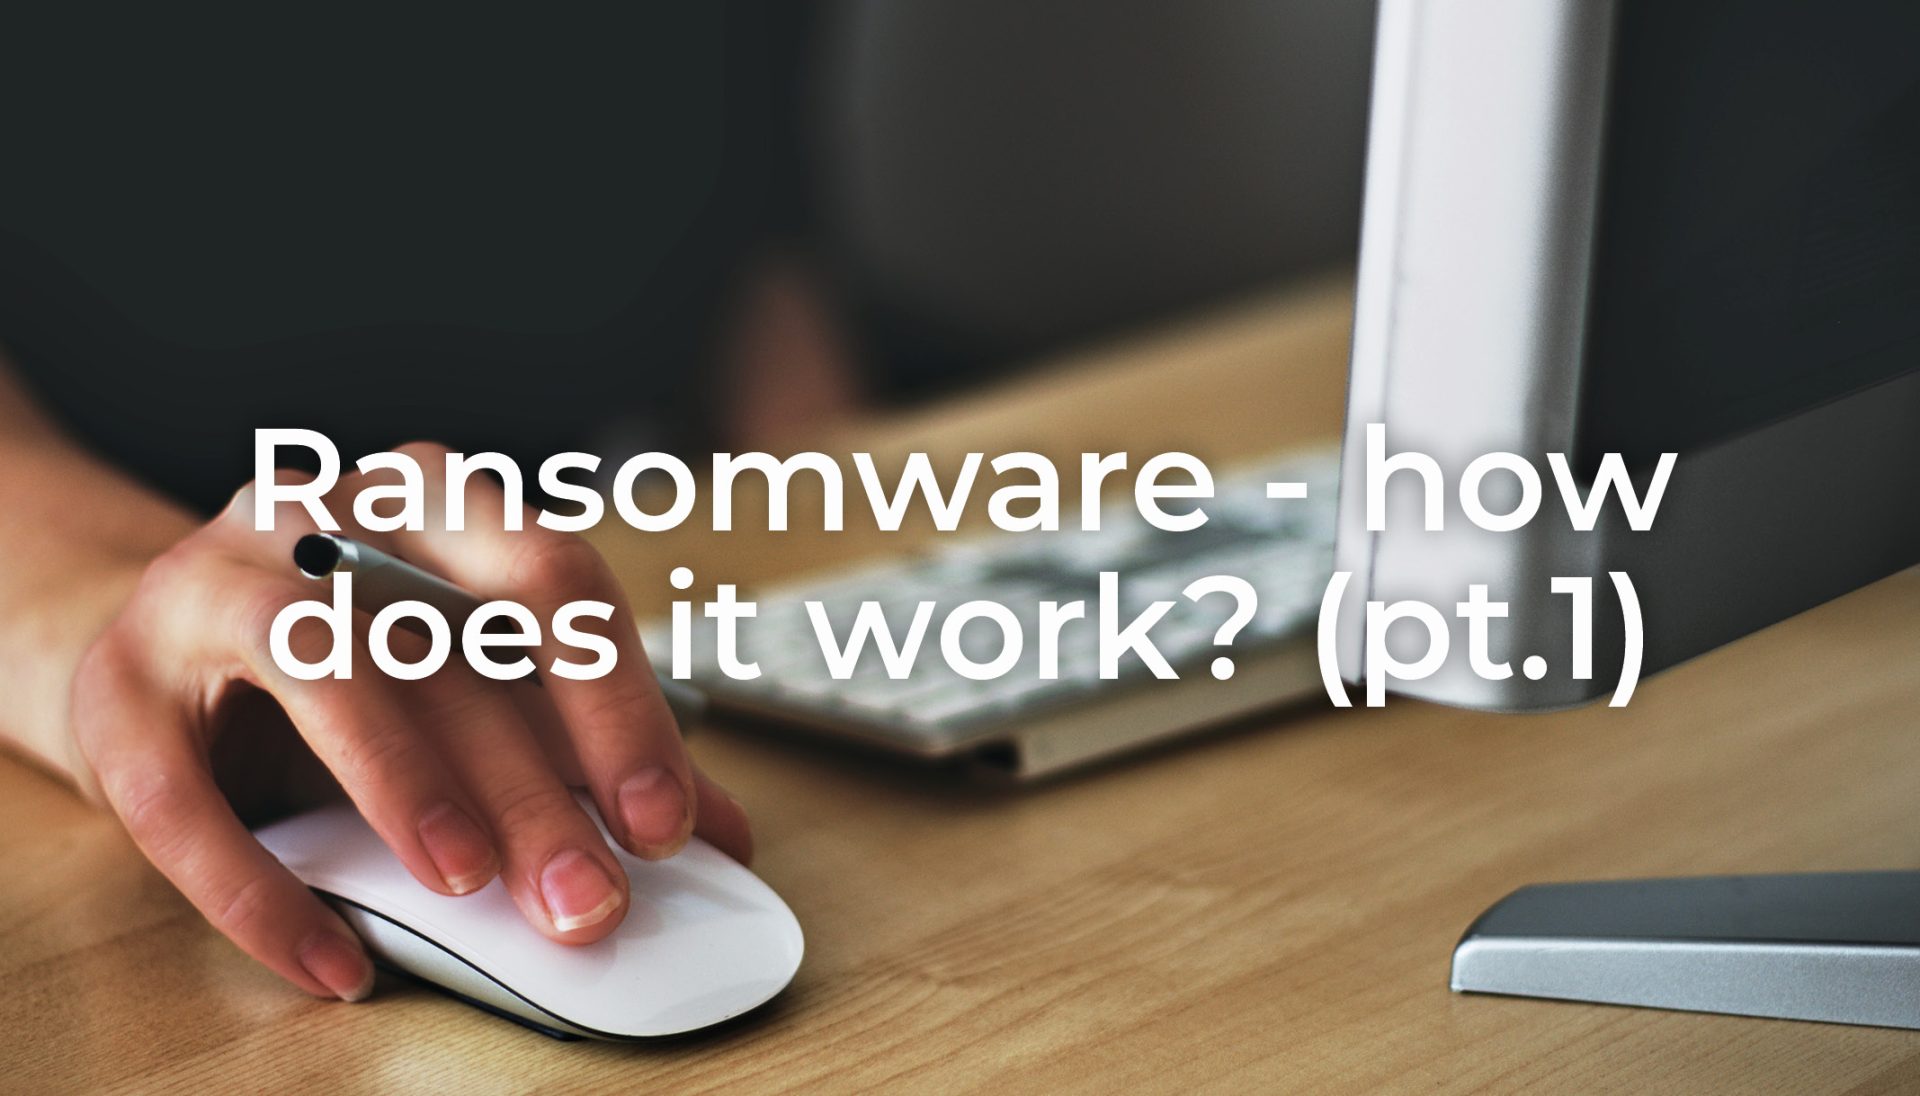 Ransomware – How does it work? (part 1)